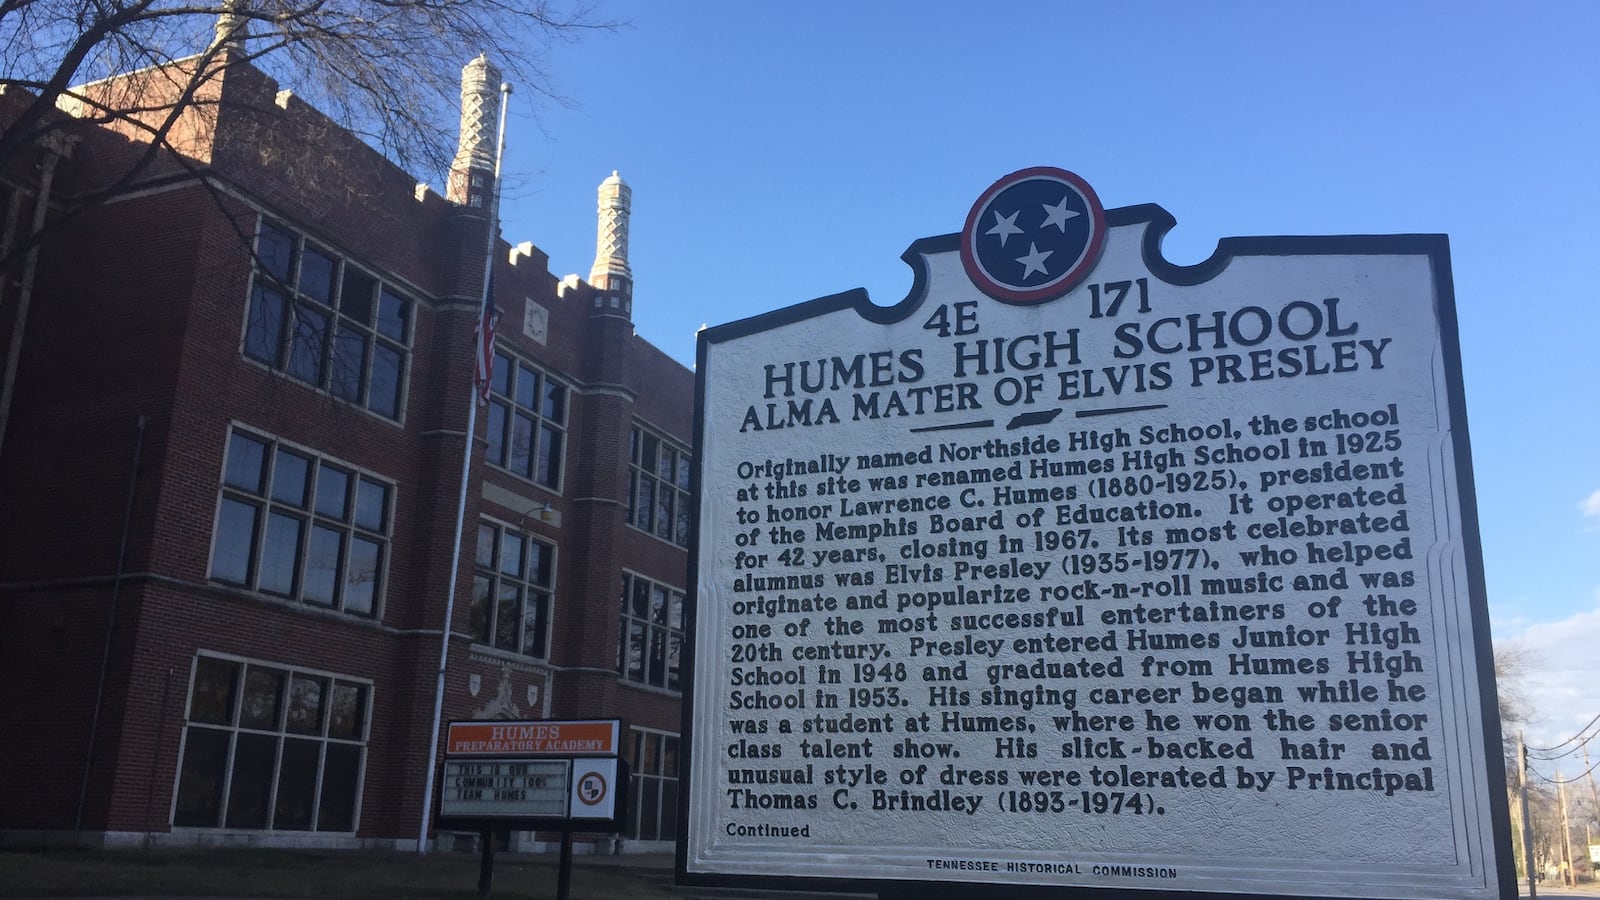 Opened in 1925 as Humes High School, the north Memphis school is now Humes Preparatory Academy Middle and operates under the purview of Tennessee's Achievement School District.  The charter school is managed by Gestalt Community Schools, which plans to exit as operator this spring.